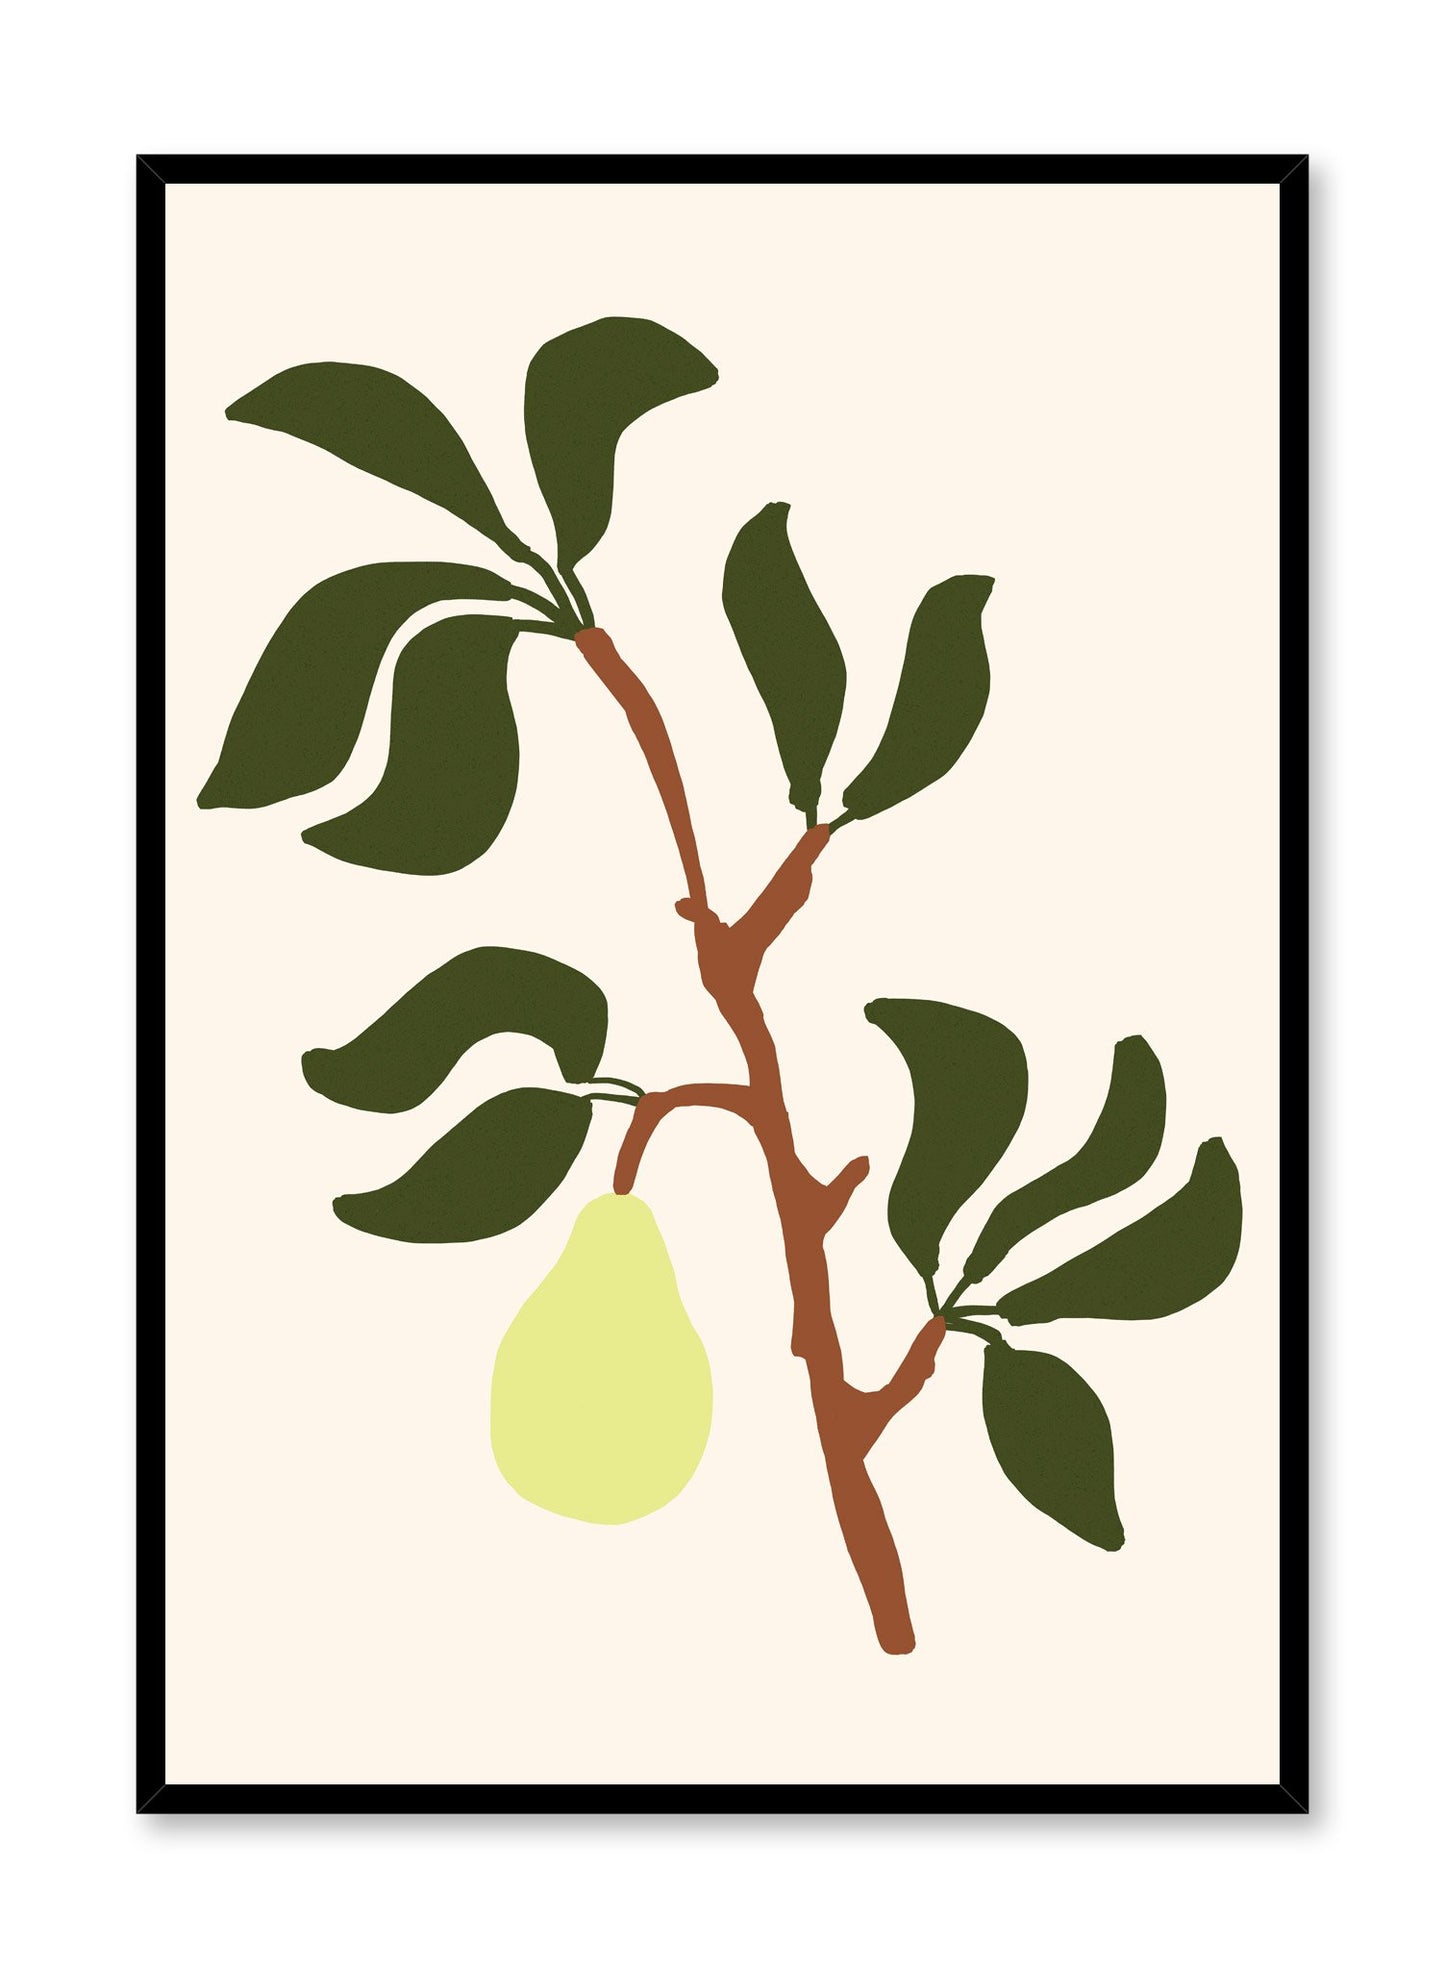 Pear Tree Branch is a pear fruit illustration poster by Opposite Wall.